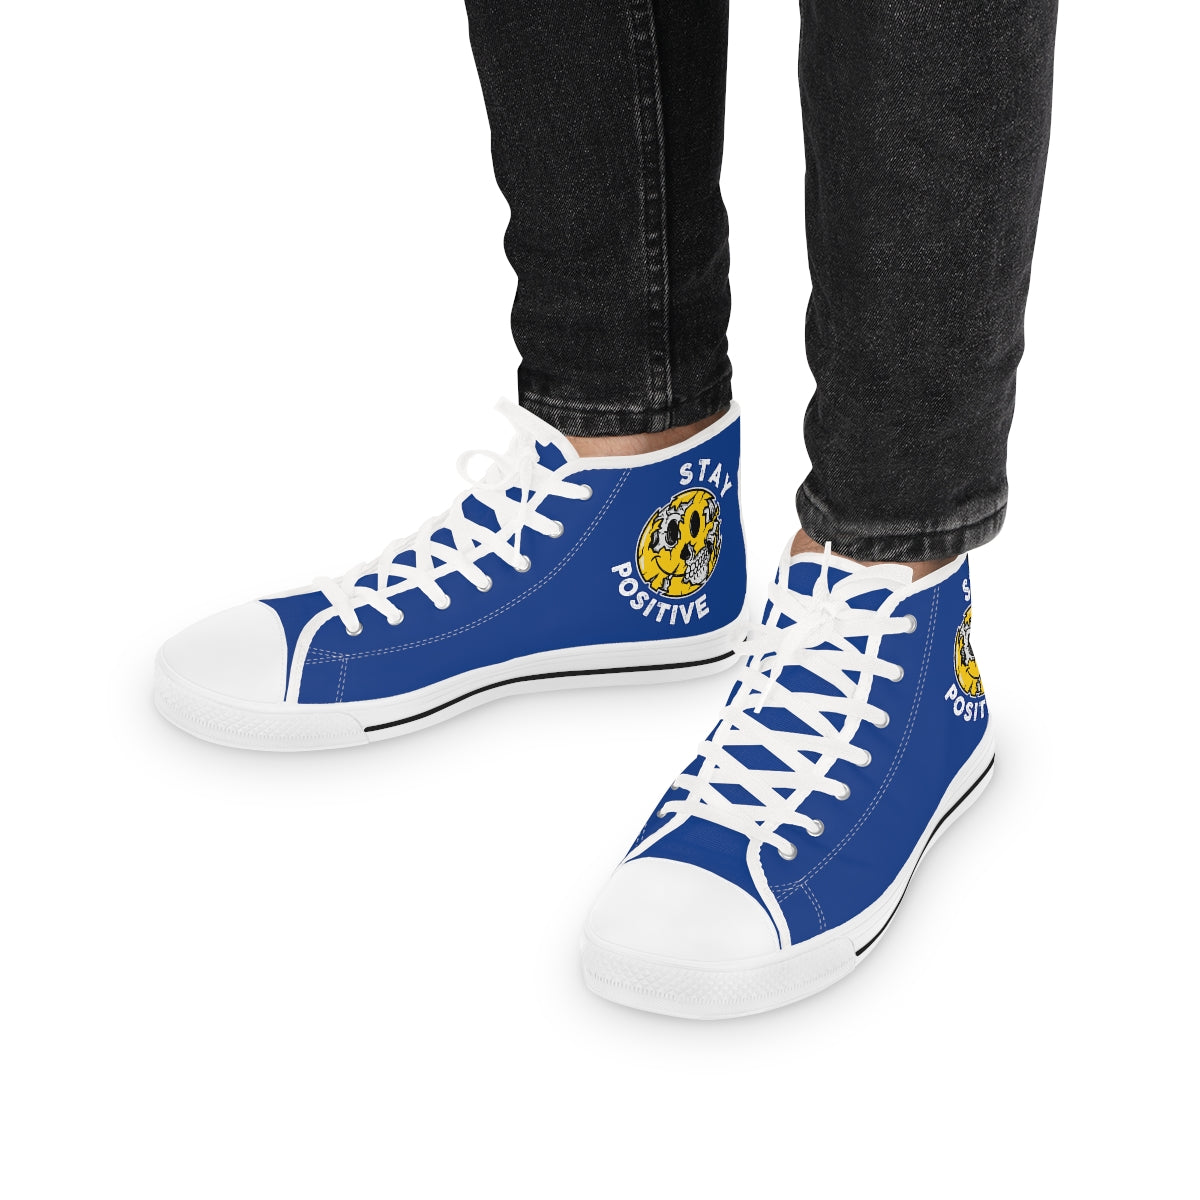 Stay Positive [Blue] - Men's High Top Sneakers